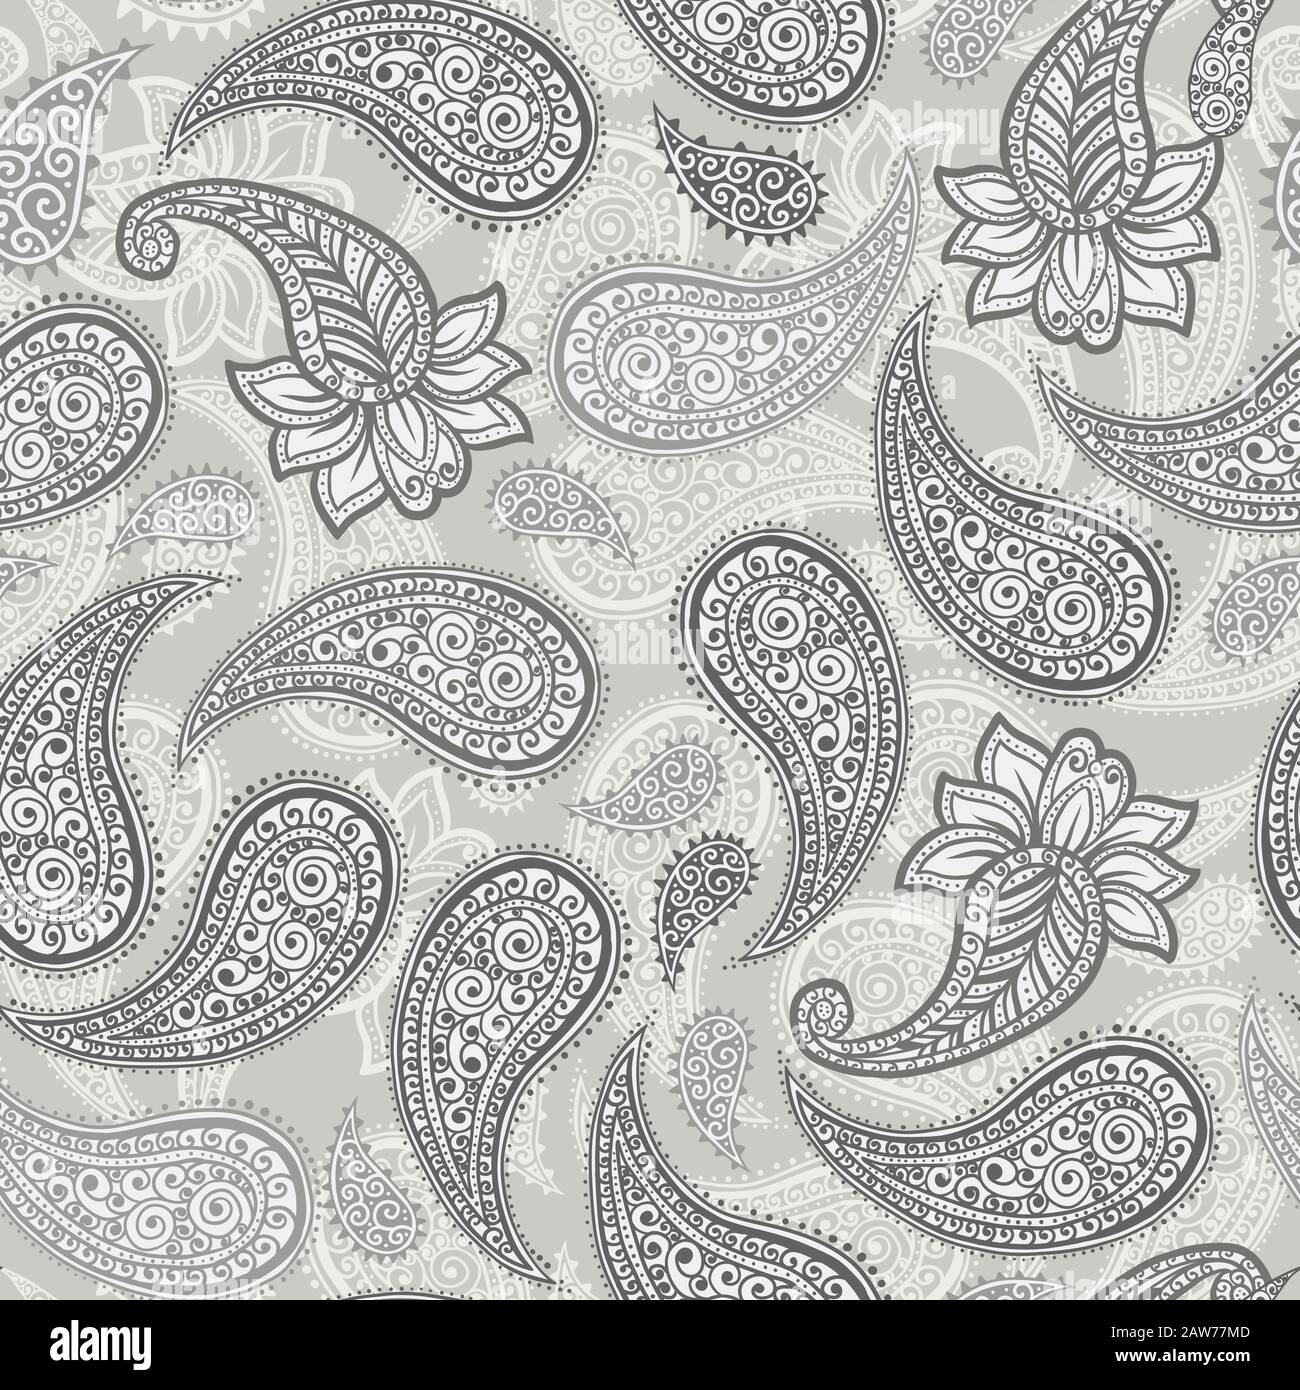 Paisley pattern background, vector seamless floral ornament for textile or wallpaper design. Indian paisley pattern with vintage flower and leaf motif, gray ornate flower, art decoration background Stock Vector